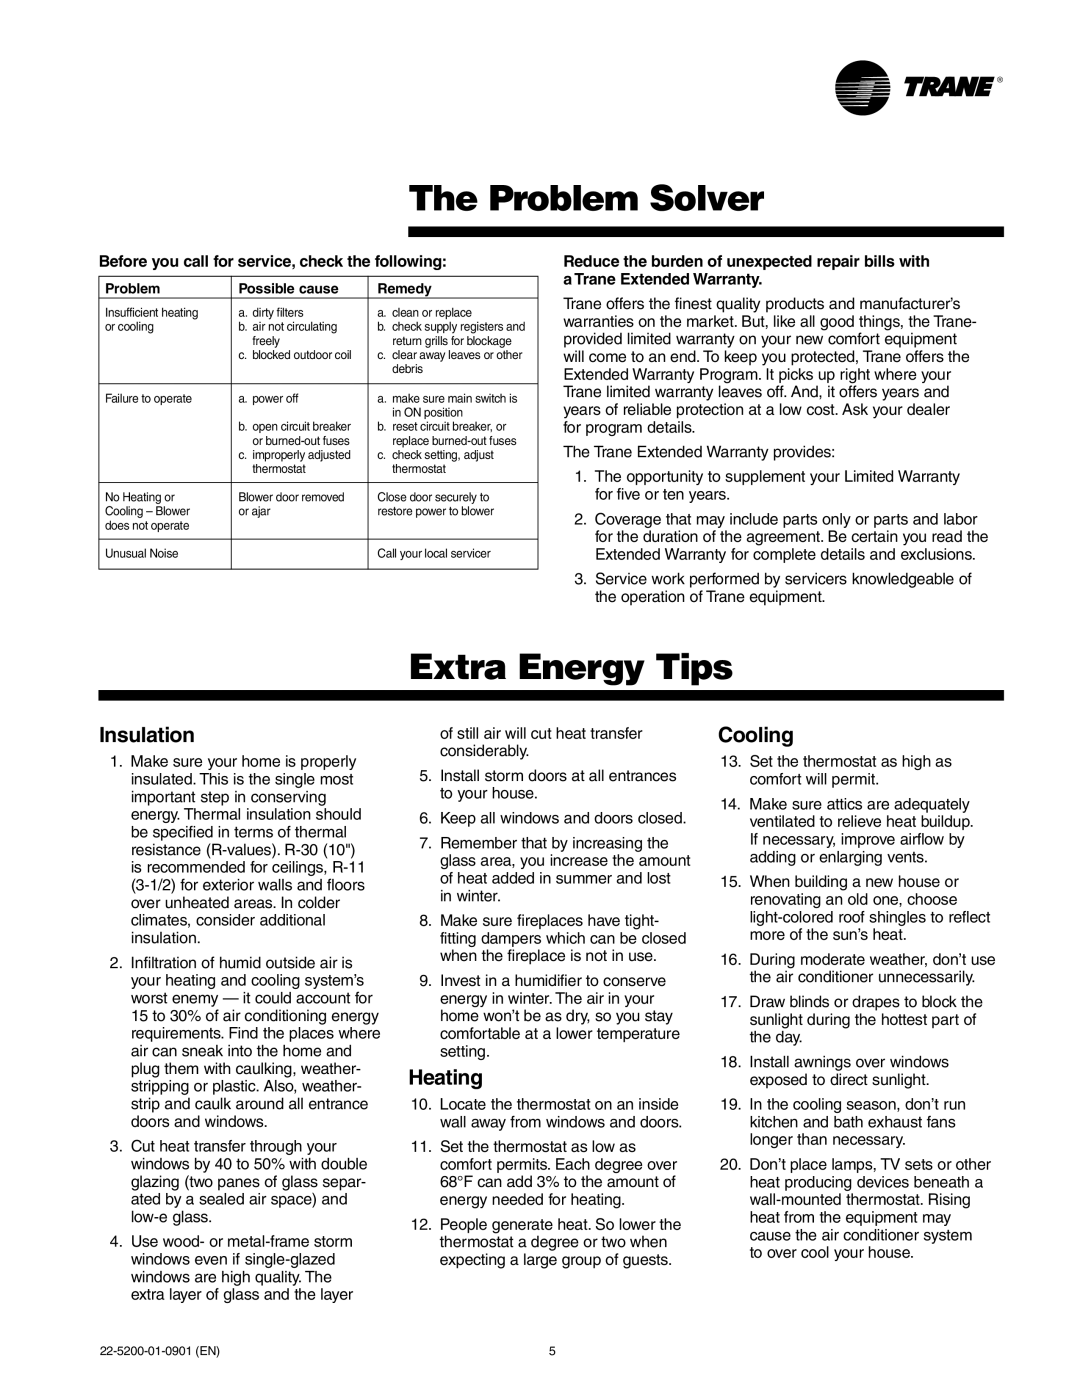 Trane 22-5200-01-0901 (EN) manual The Problem Solver, Extra Energy Tips, Insulation, Heating, Cooling 